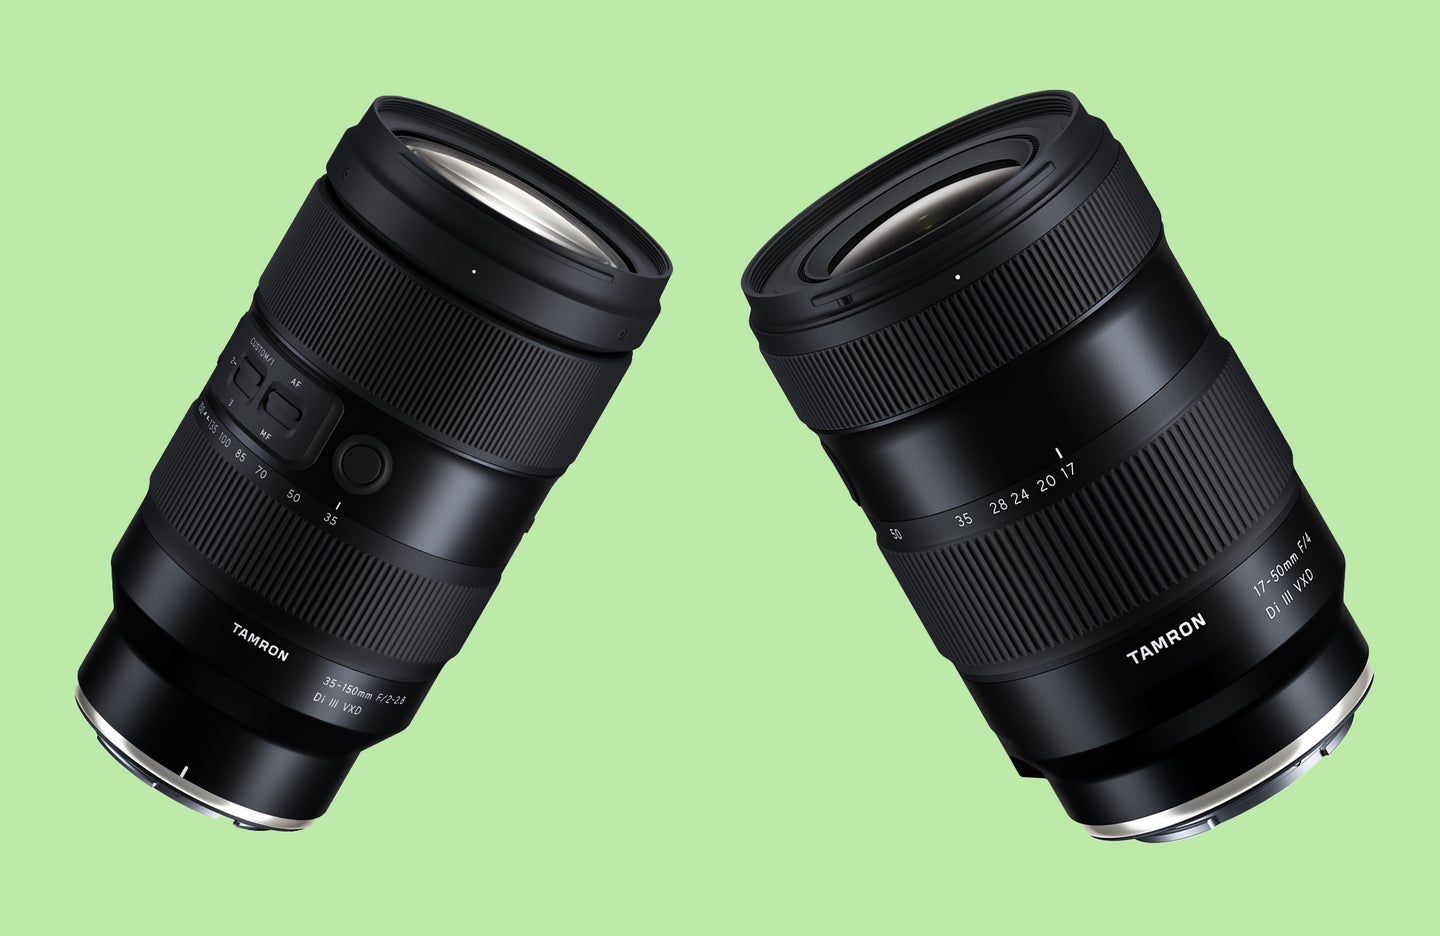 The Tamron 17-50mm F/4 Di III VXD and 35-150mm F/2-2.8 Di III VXD against a green background